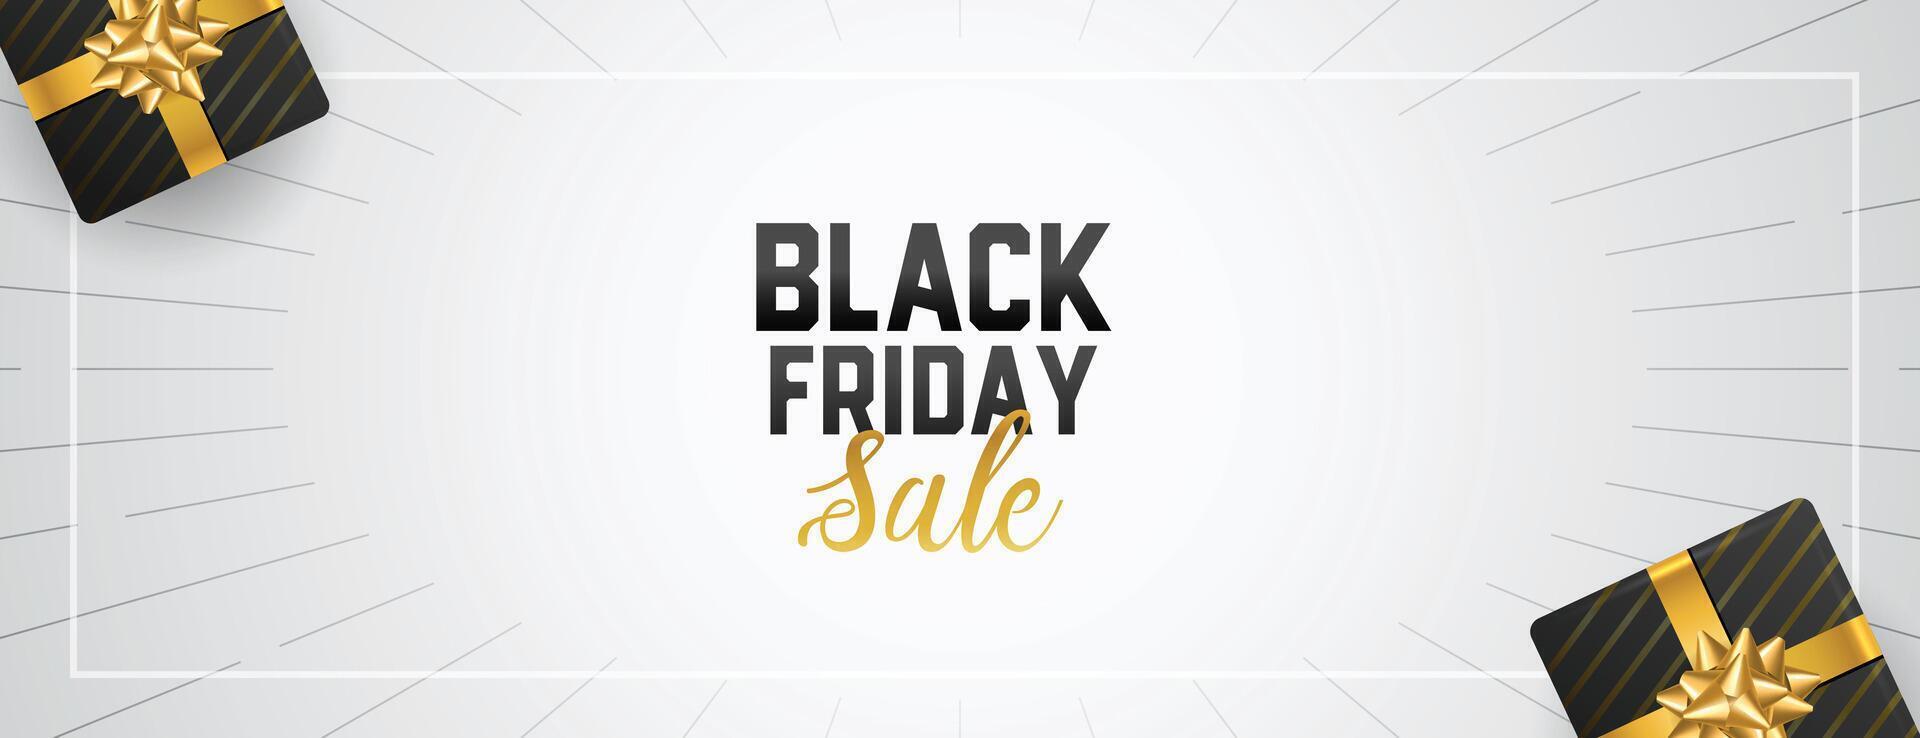 black friday sale banner with gift boxes vector